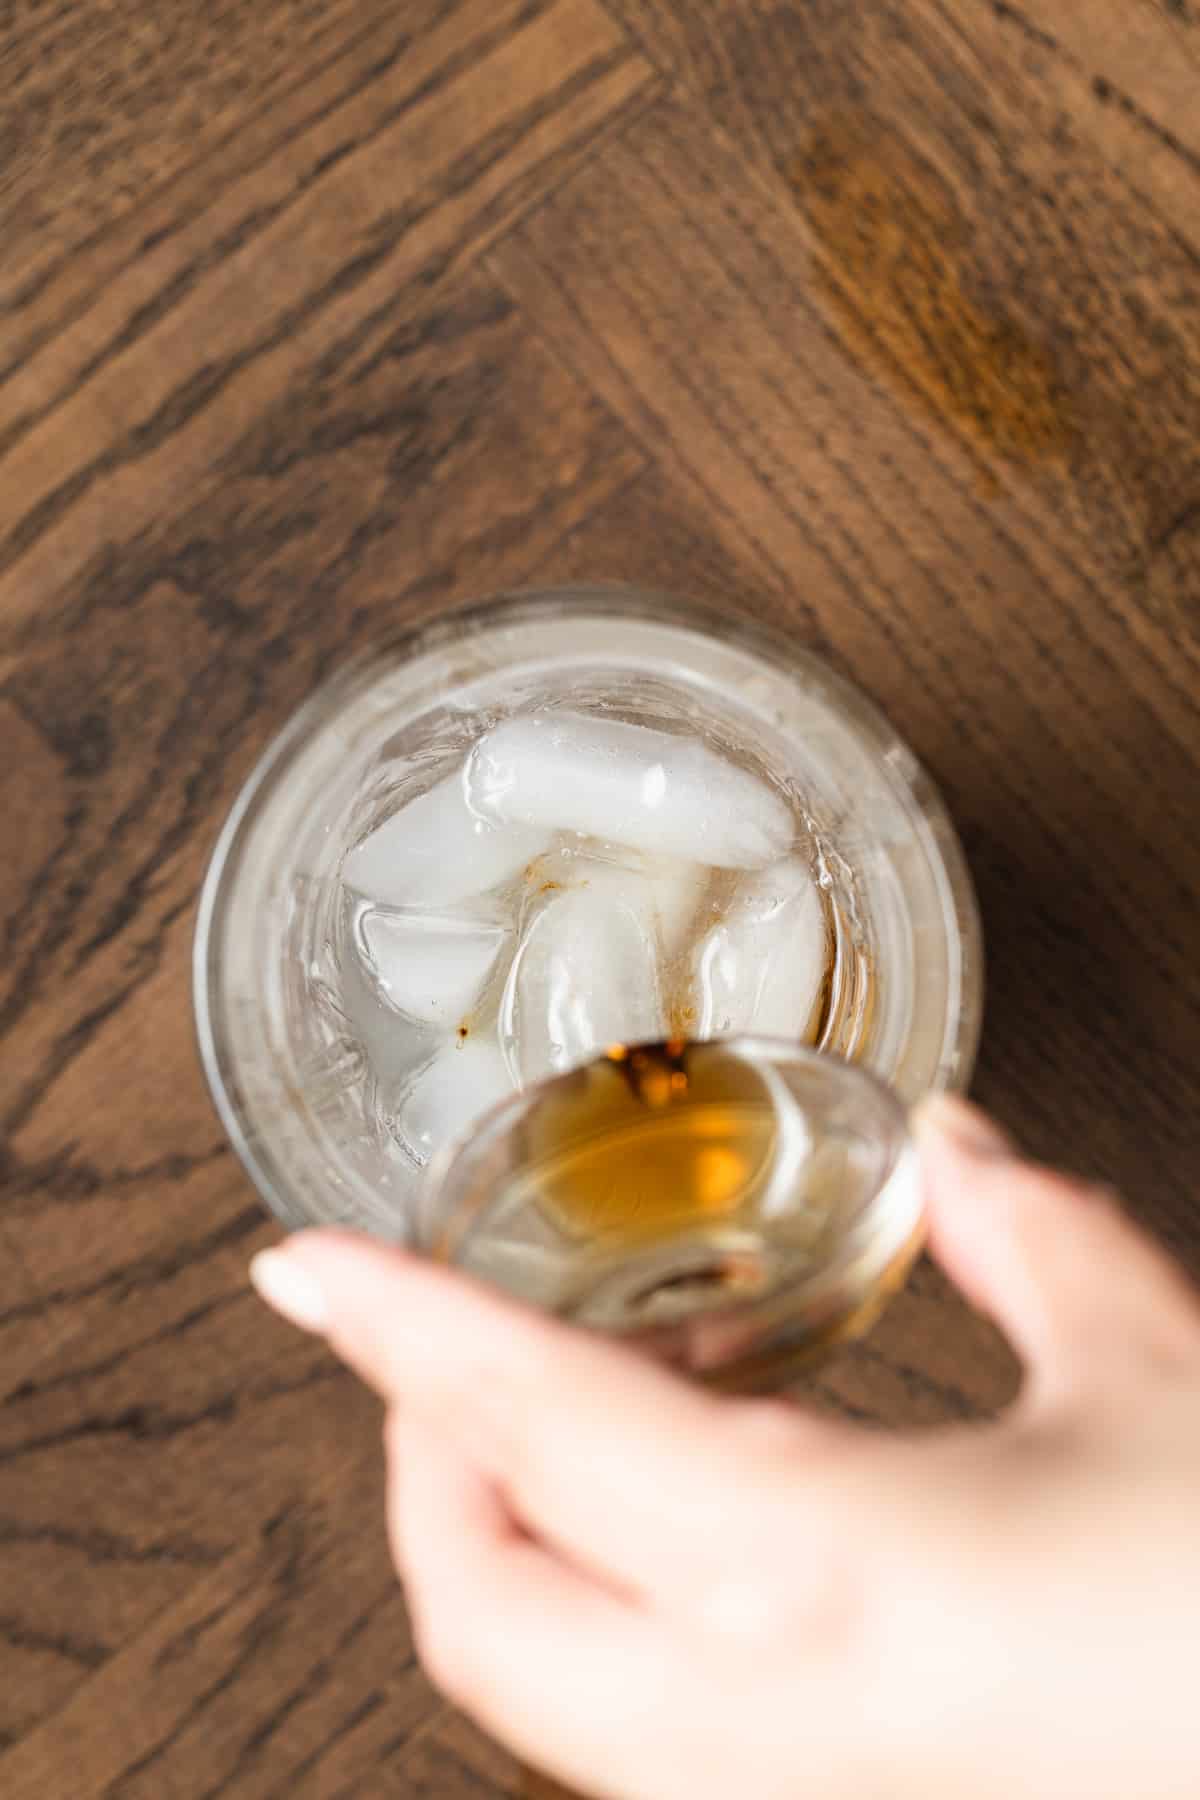 Pouring maple syrup into a cocktail shaker filled with ice.